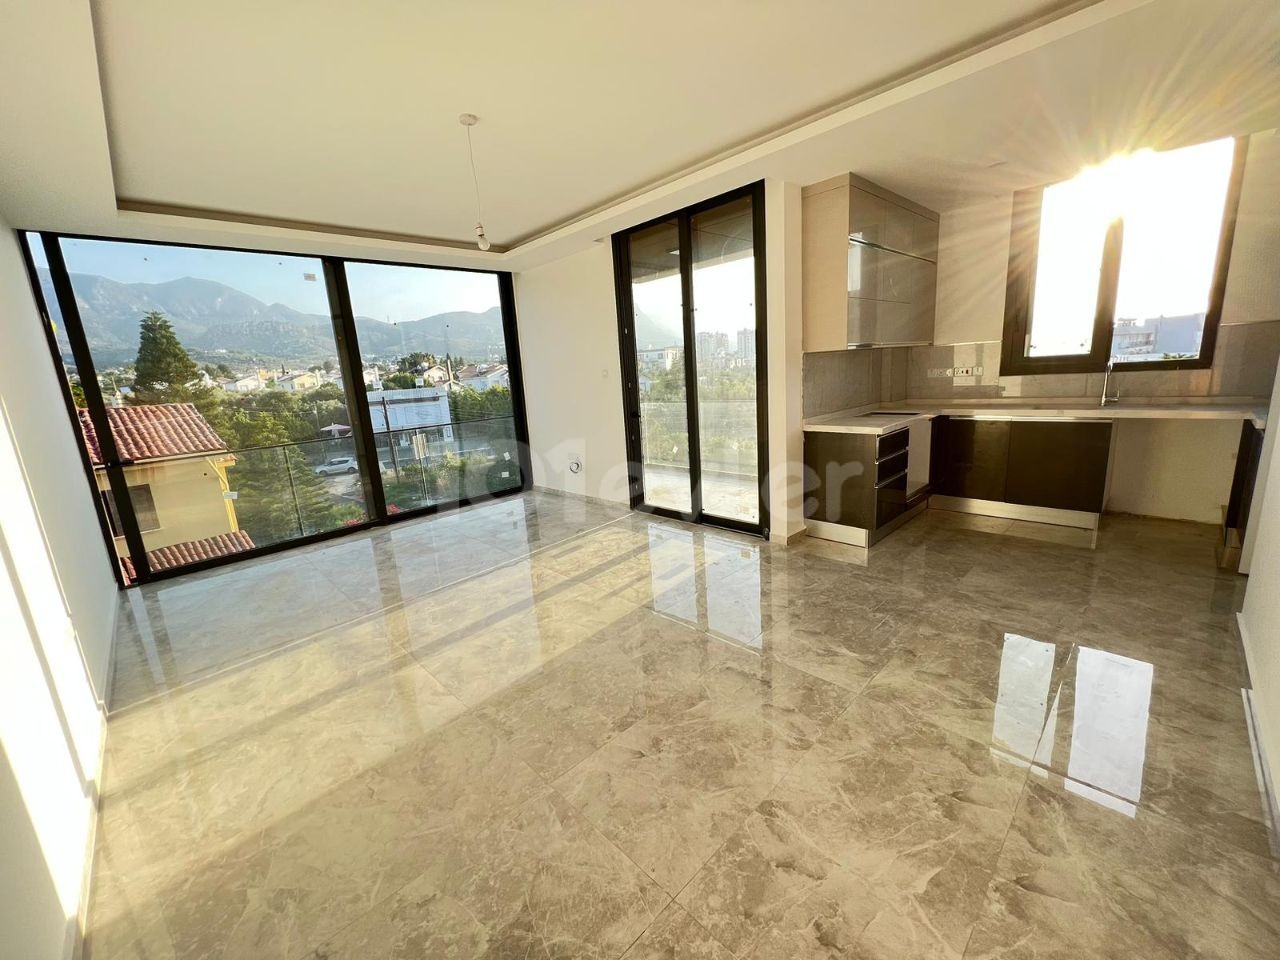 3+1 En-Suite Residence Apartments for Sale on Bellapais Road, the Pearl of Kyrenia, in a Very Special Location, with Magnificent Mountain and Sea Views, Indoor Parking